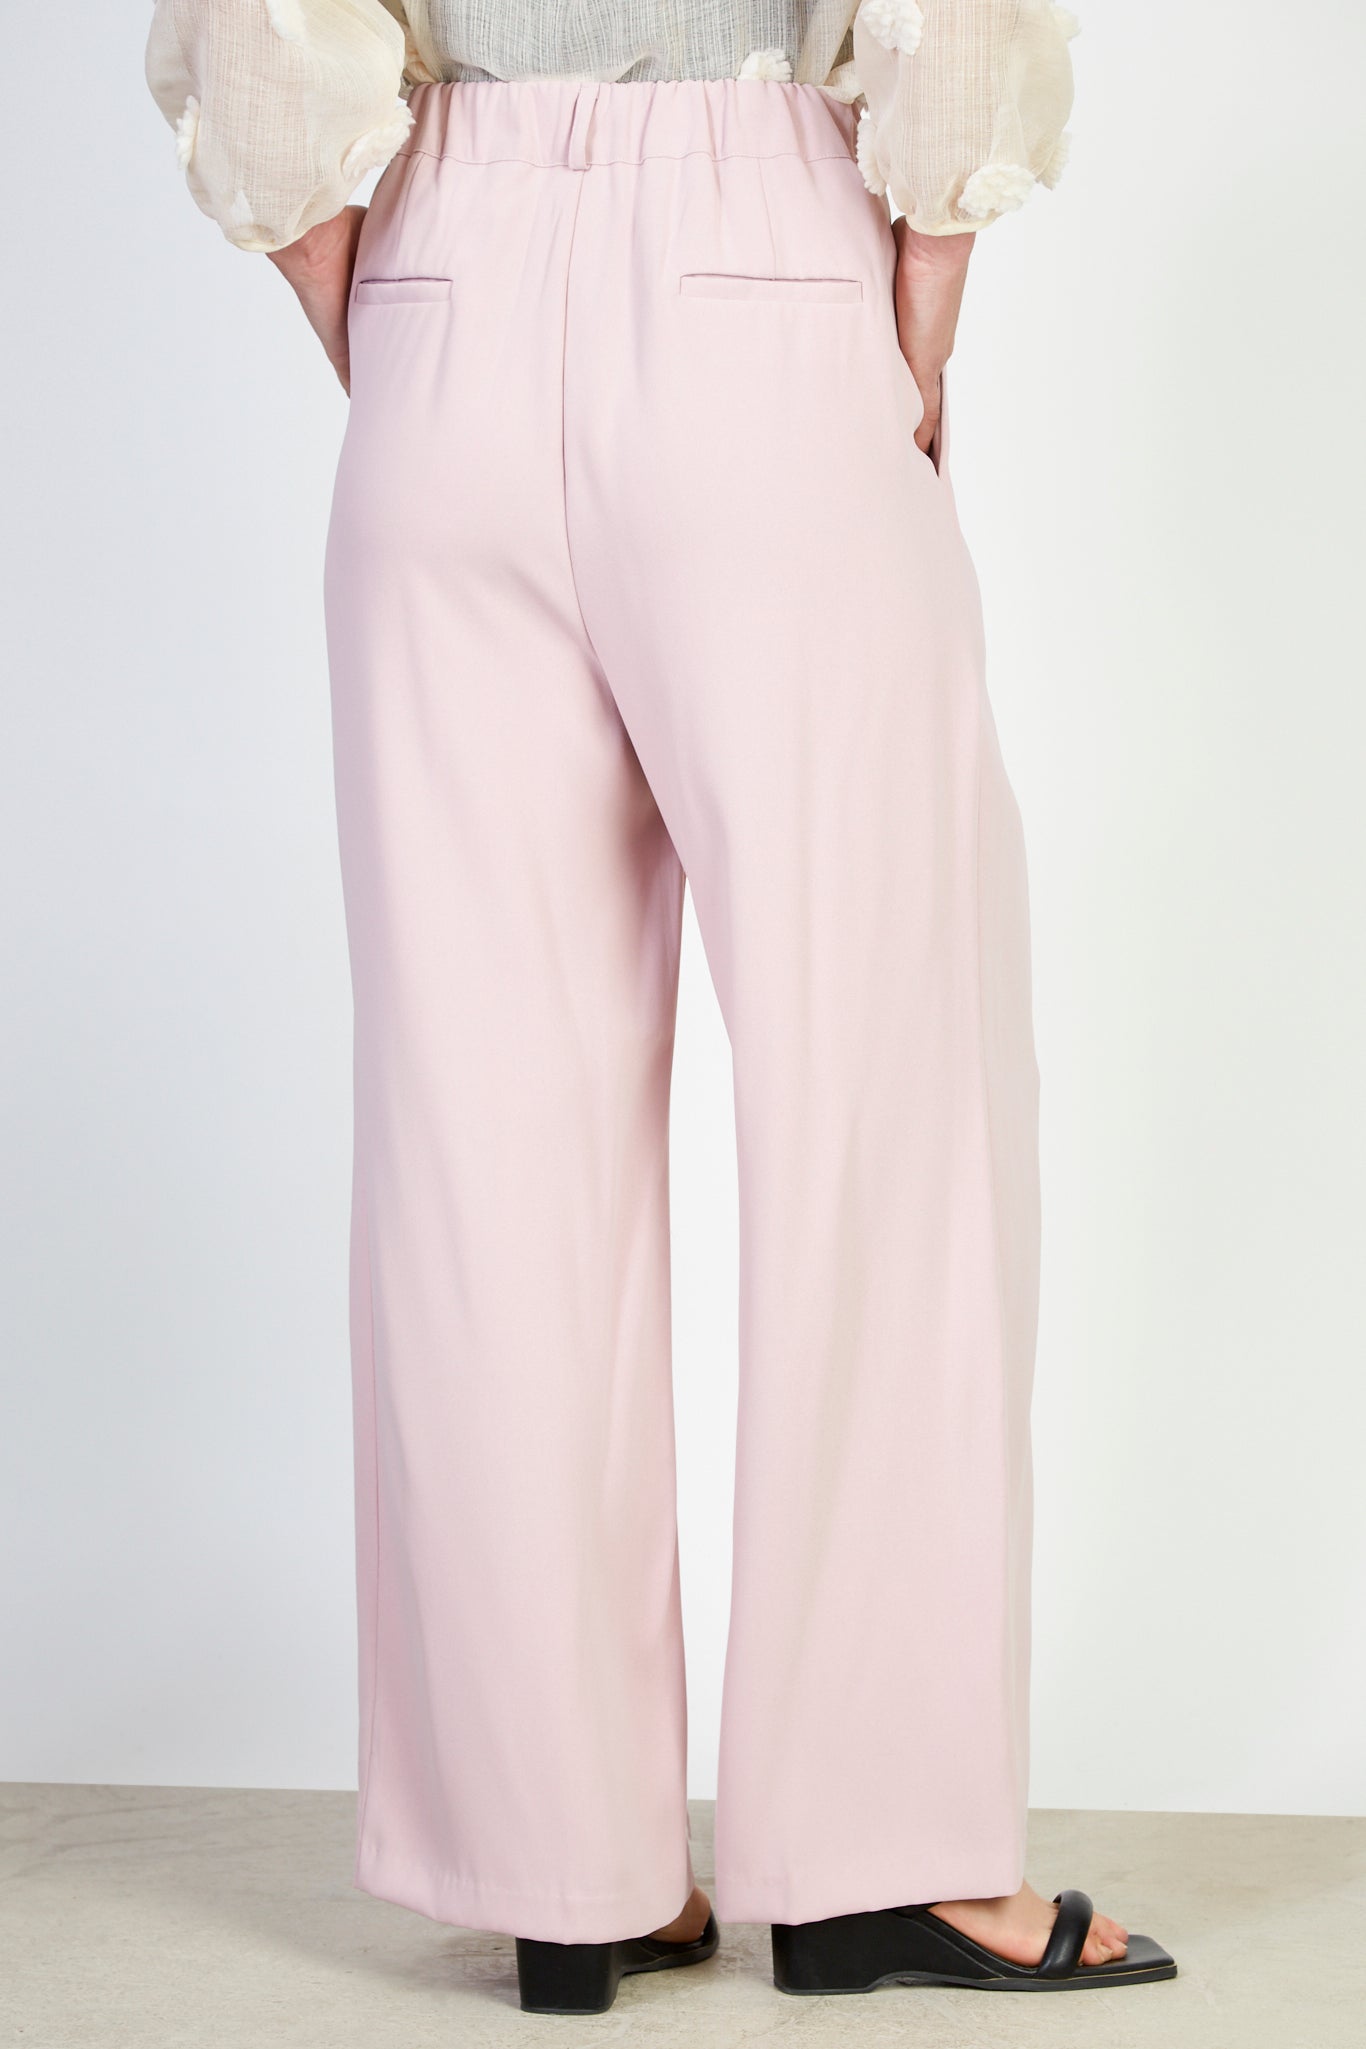 Pale pink smart trousers